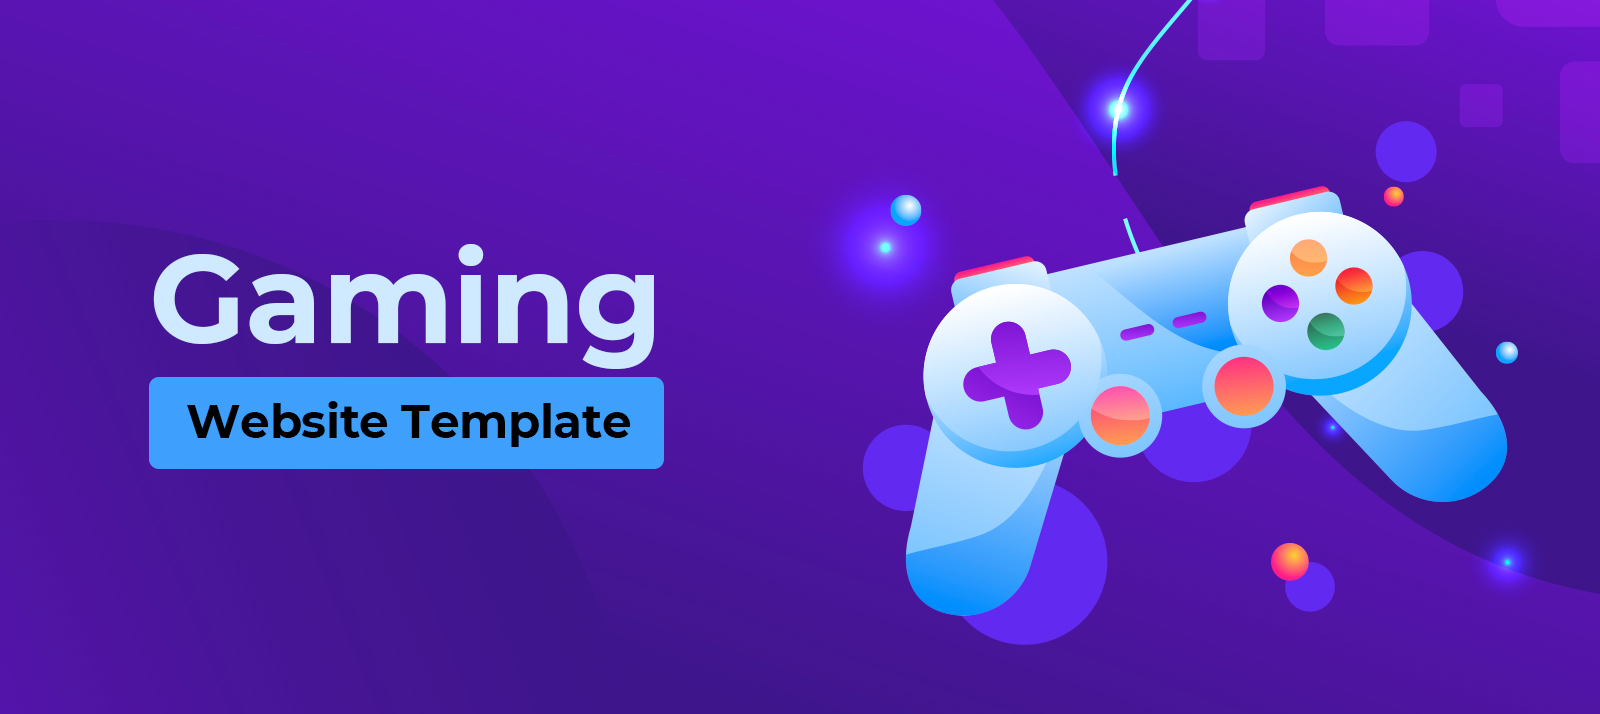  17 New and Trending Gaming Website Templates For Game Developers 